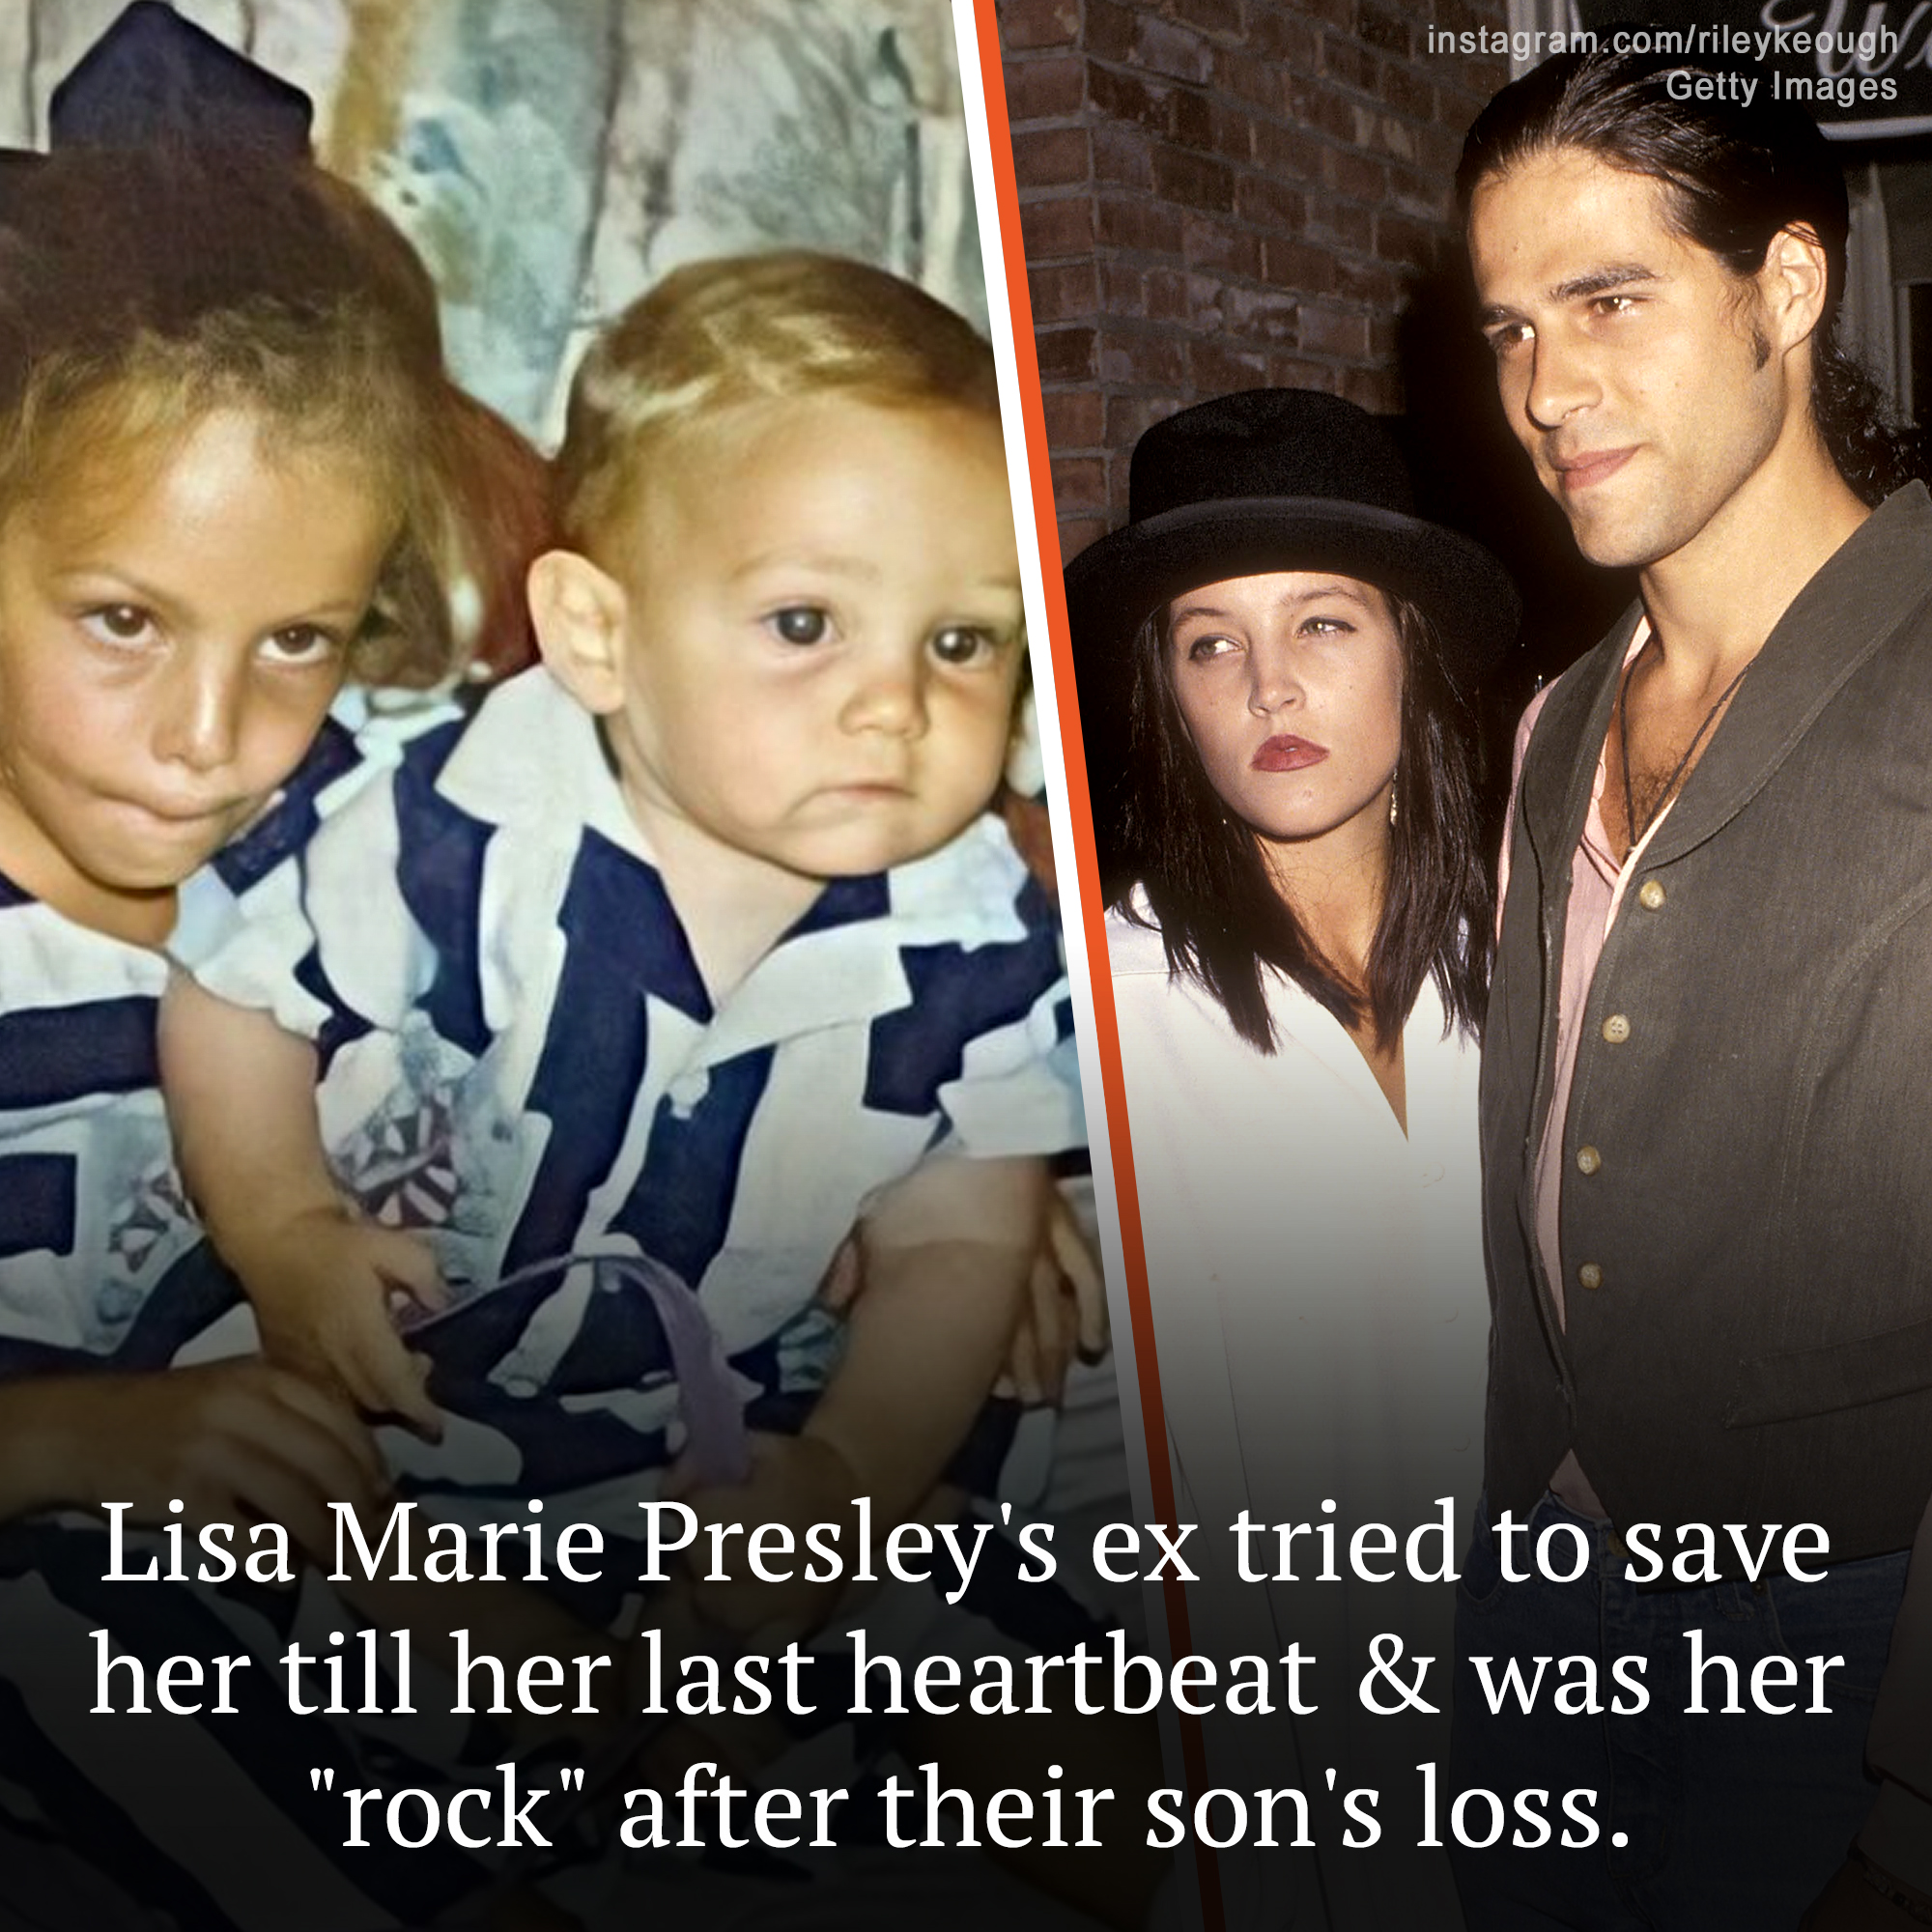 Lisa Marie Presley and her ex-husband and dad of her two kids, Danny Keough, came back together to lean on one another while mourning their son. “I knew this is the one man I could be connected to for the rest of my life,” Lisa once said about him.